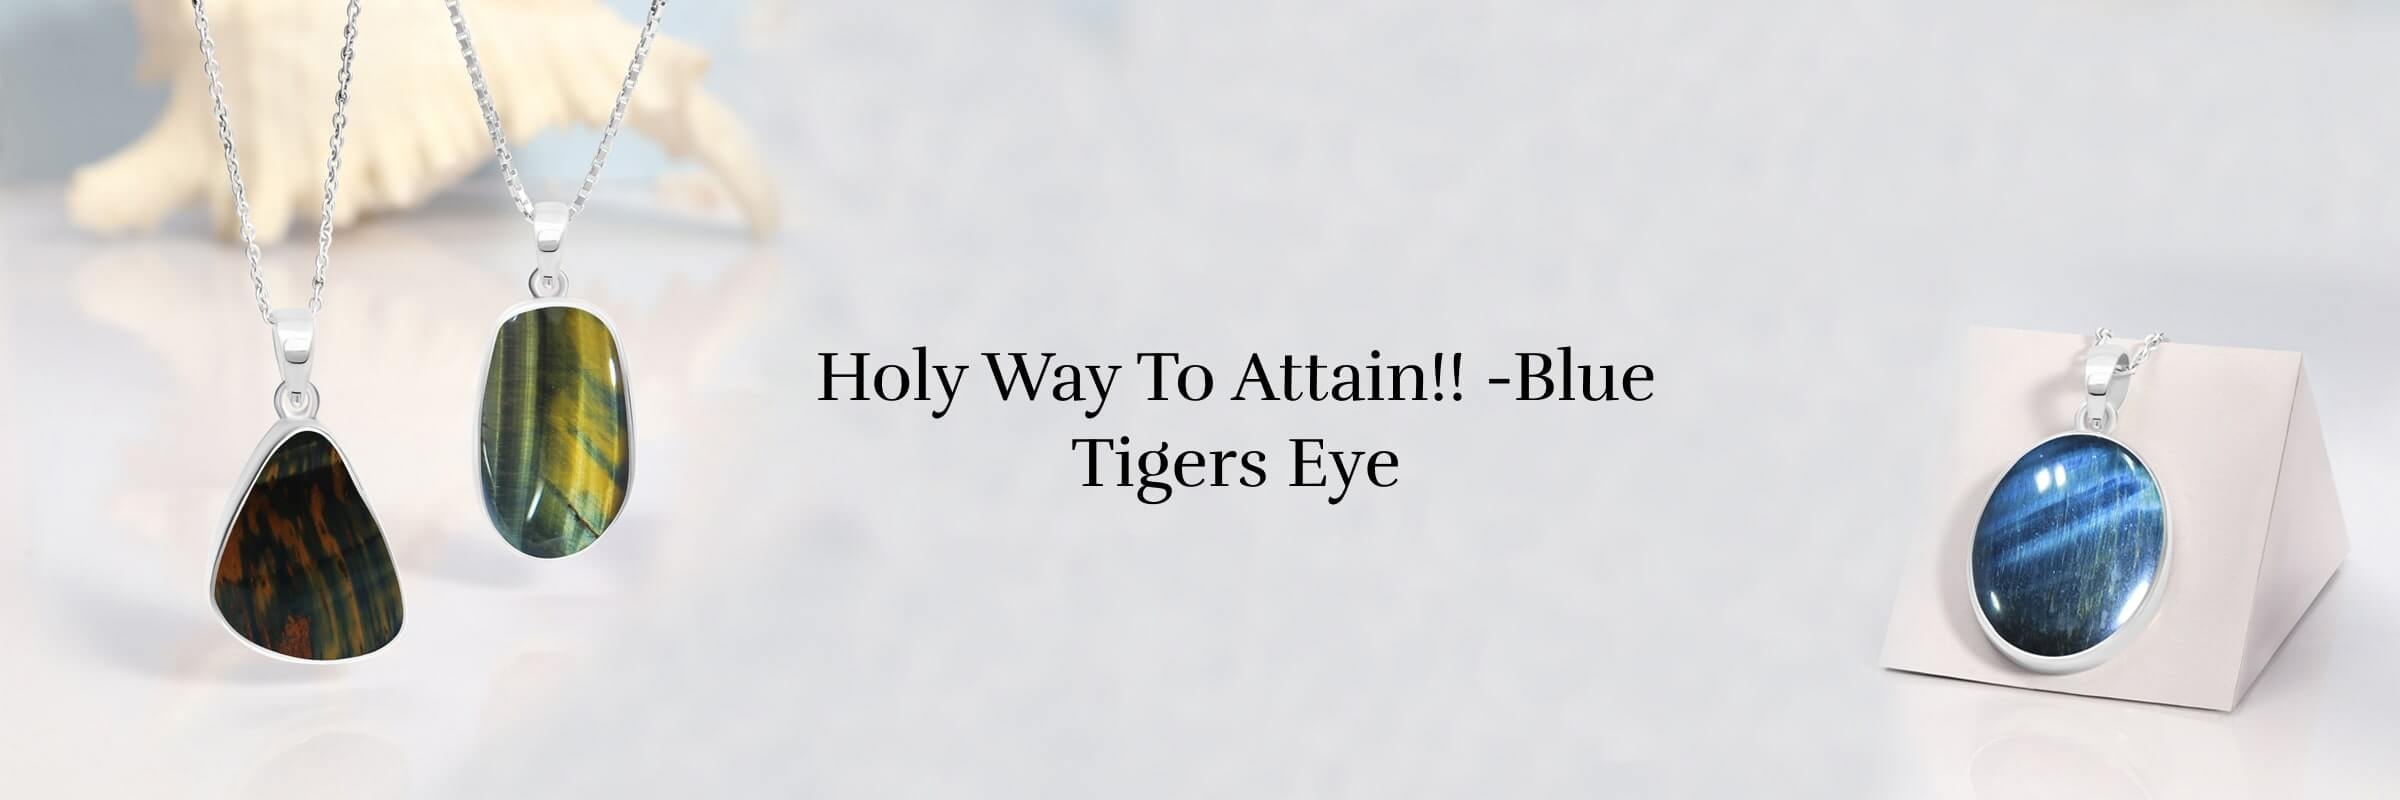 How To Use Blue Tiger Eye